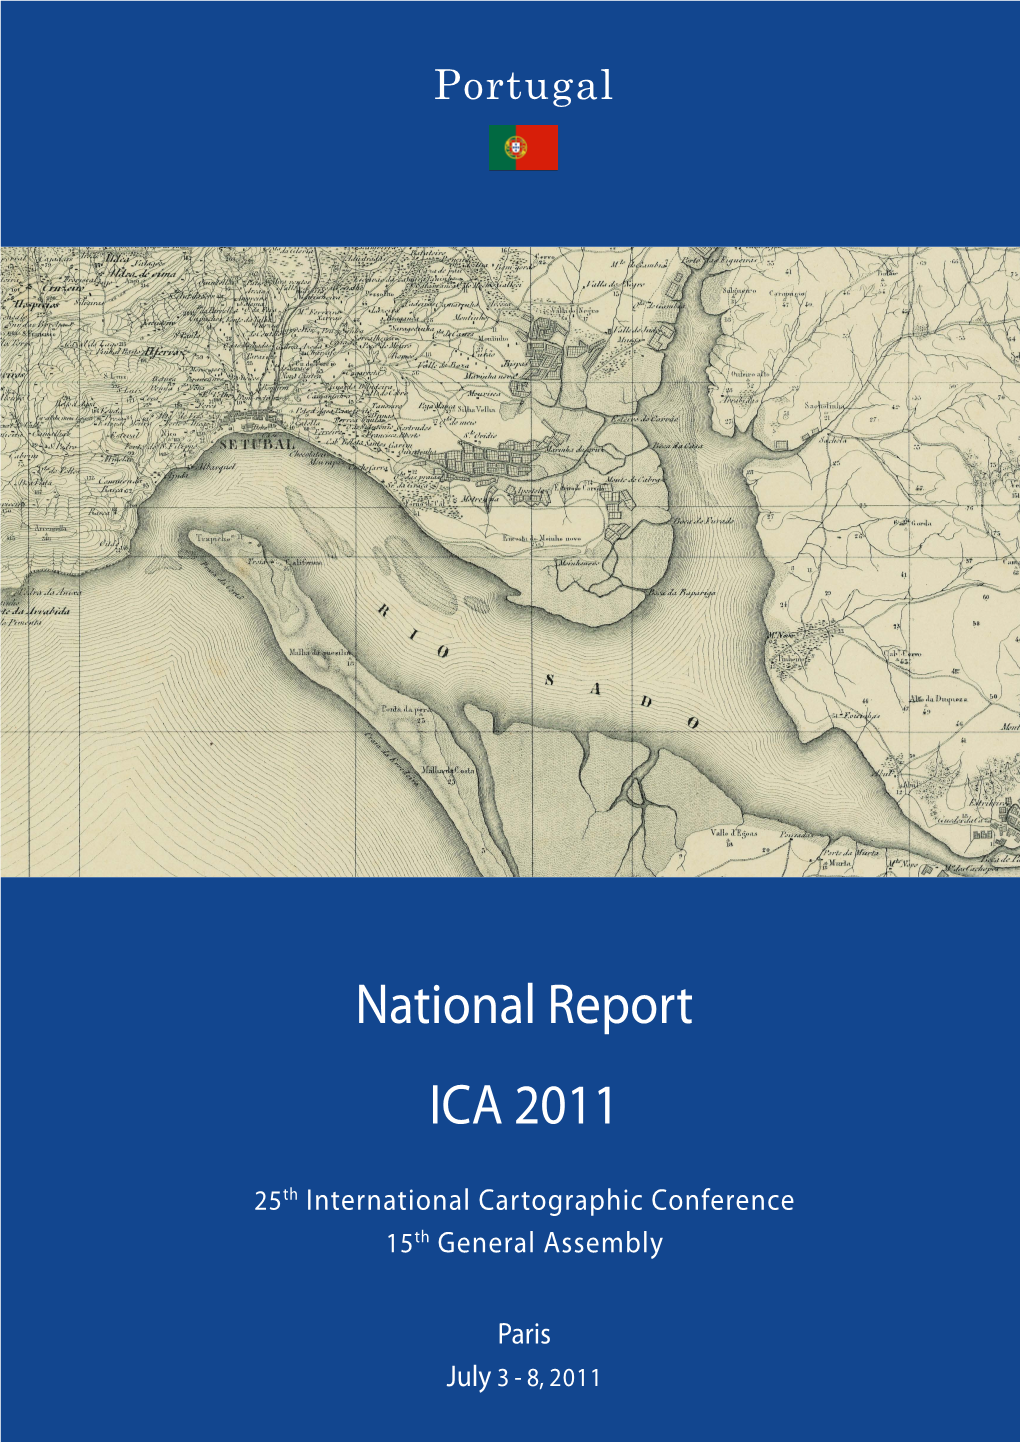 National Report ICA 2011